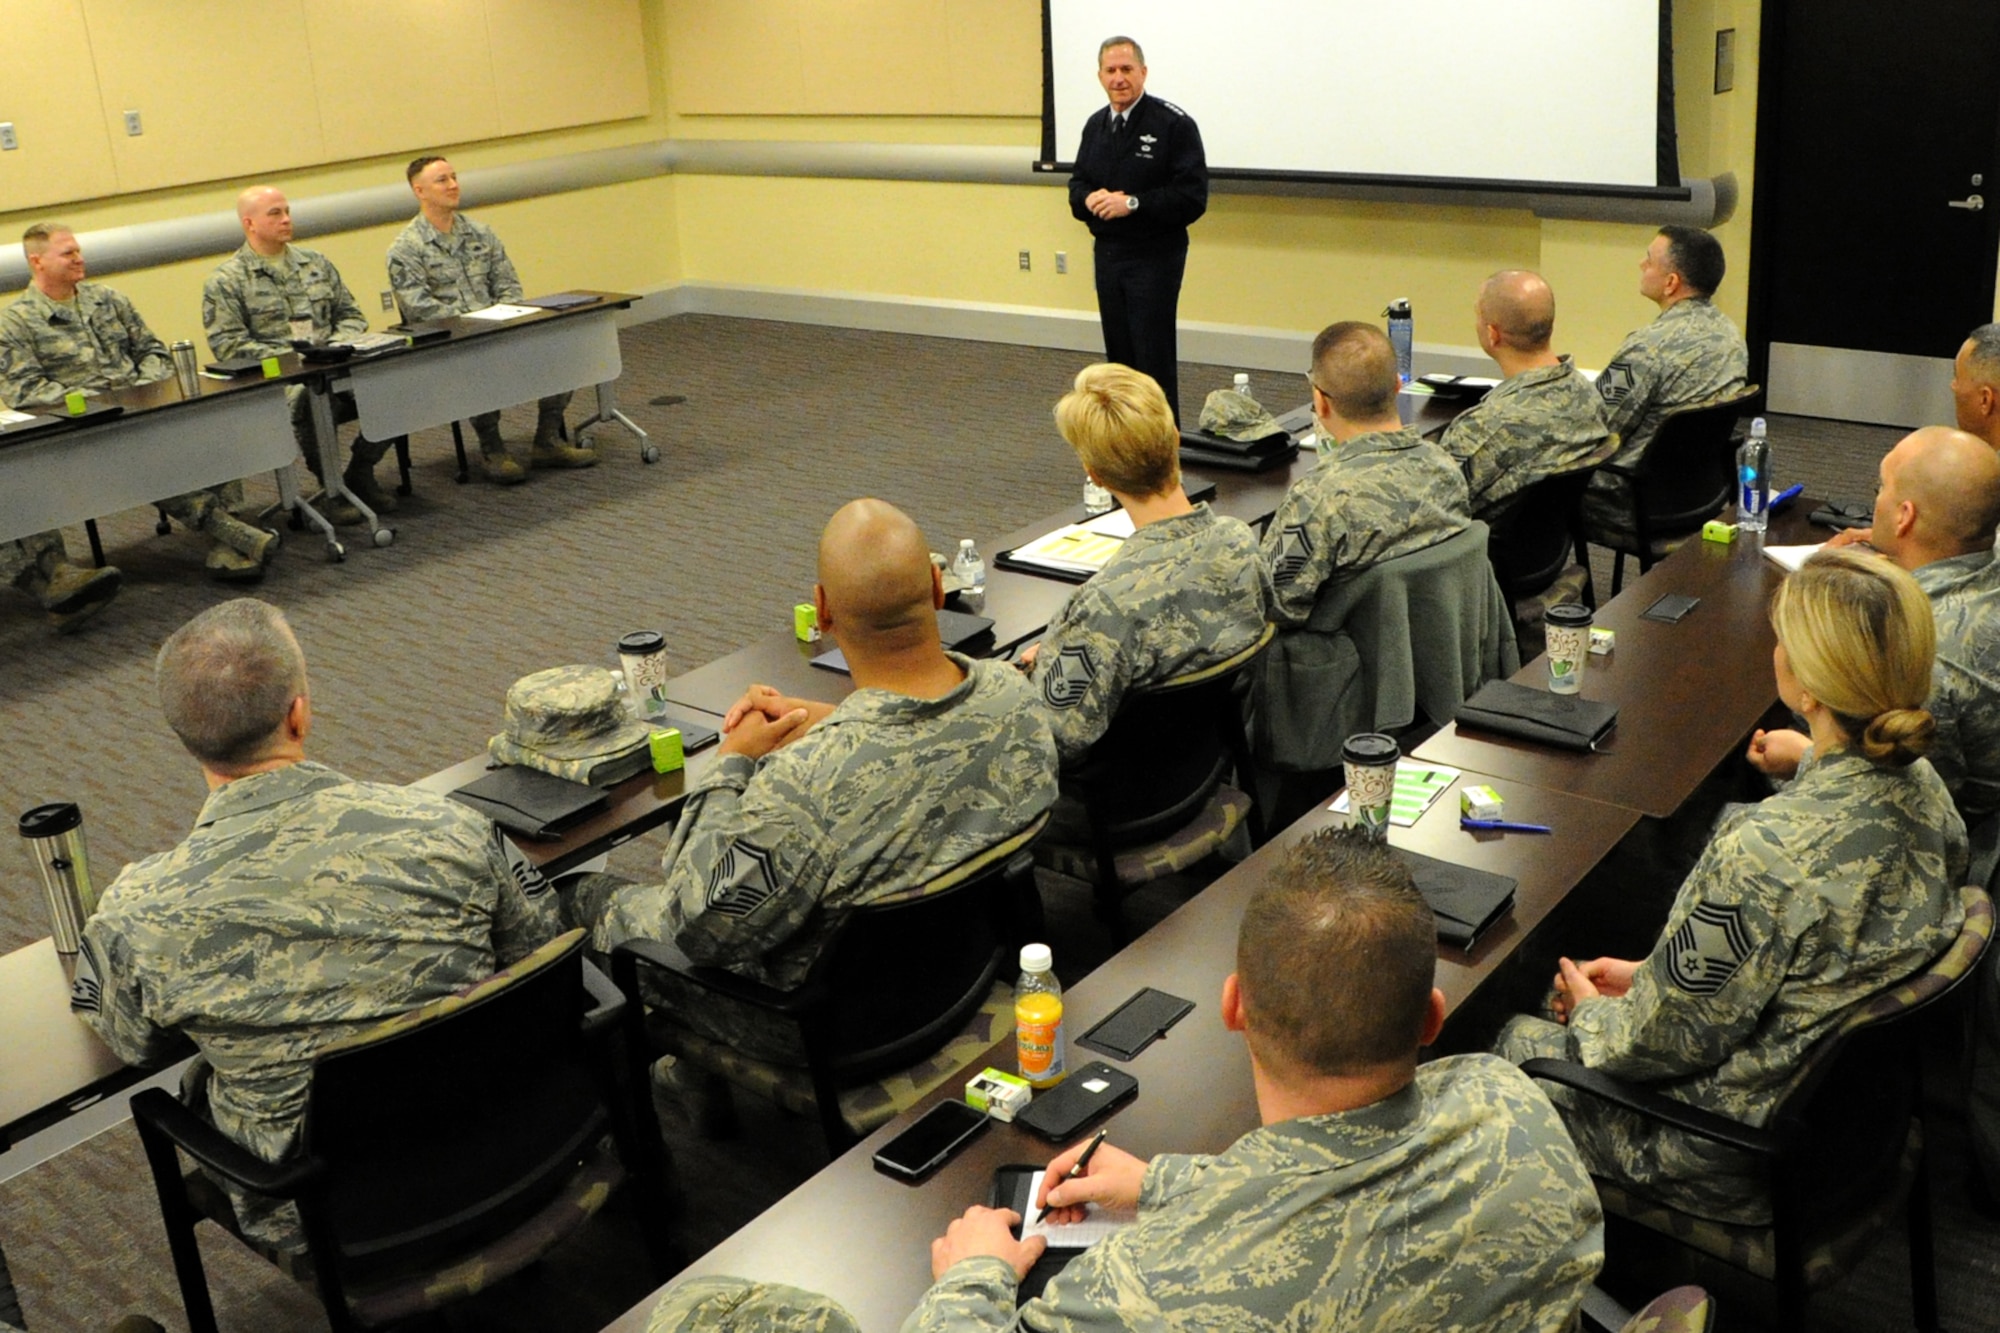 Air Force Vice Chief of Staff Gen. David L. Goldfein speaks to the newest chief master sergeants from the National Capital Region during the Air Force District of Washington’s Chief Orientation Course at Joint Base Andrews, Md., Feb. 29, 2016. Key Air Force leaders addressed the group reminding them of the increased responsibility they now have for their Airmen and the force. (U.S. Air Force photo/Tech. Sgt. Matt Davis)